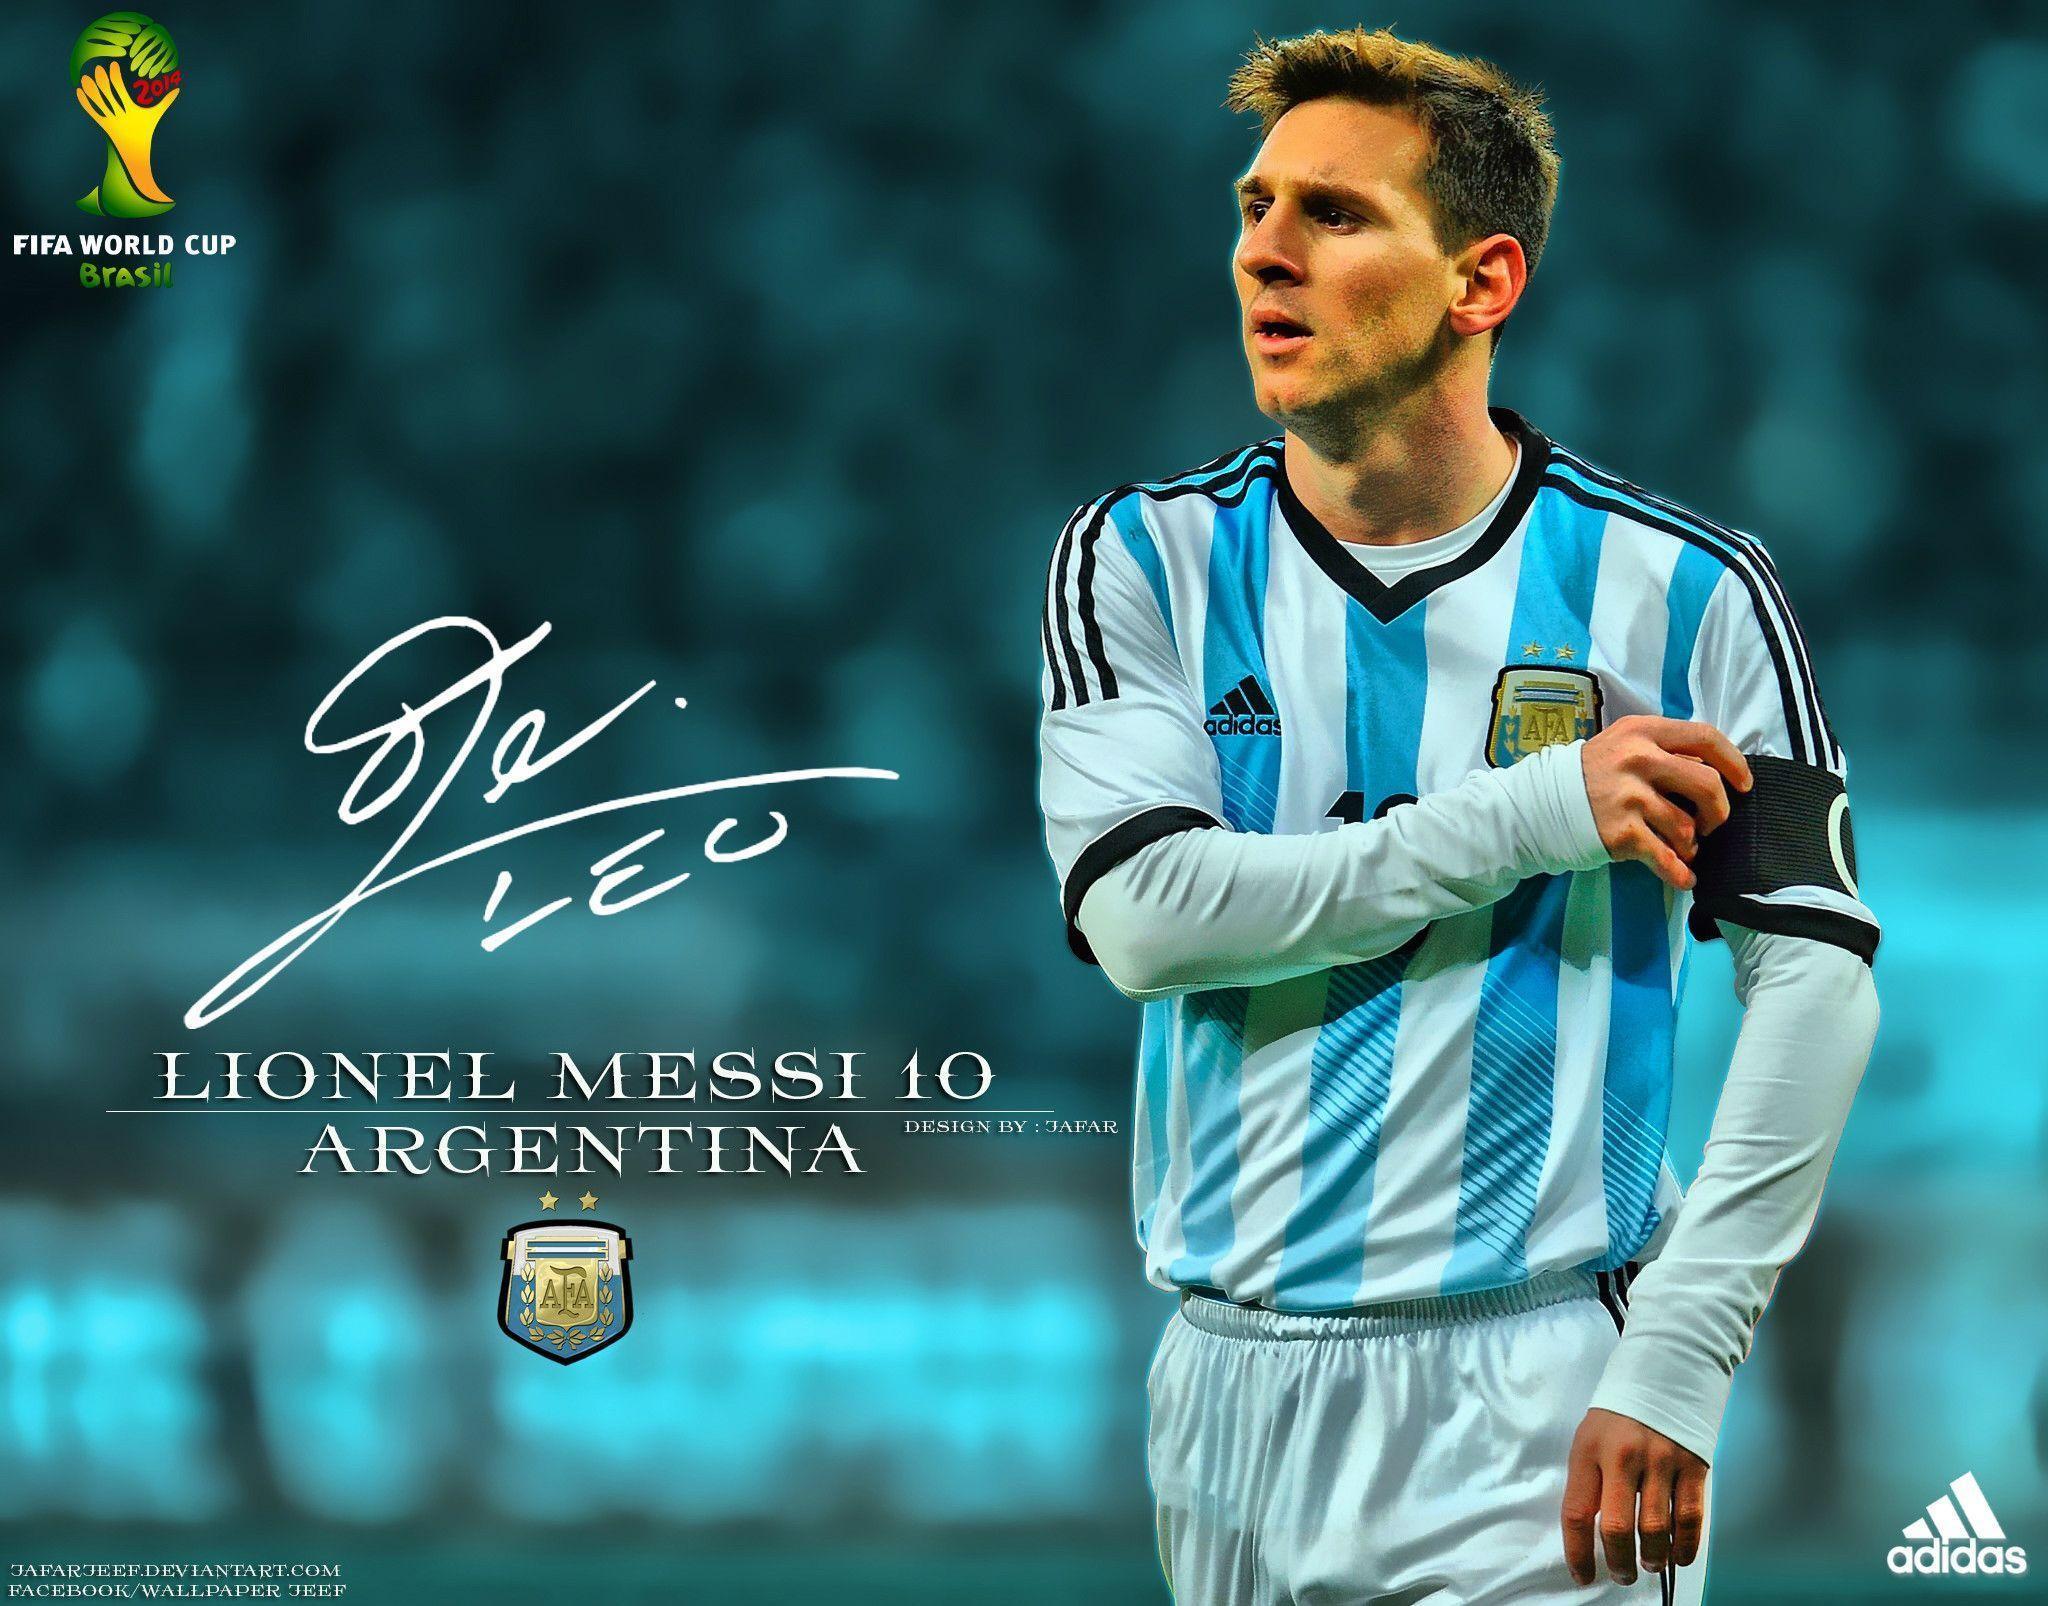 Lionel Messi 2016 Wallpapers Hd 1080p Wallpaper Cave 0216